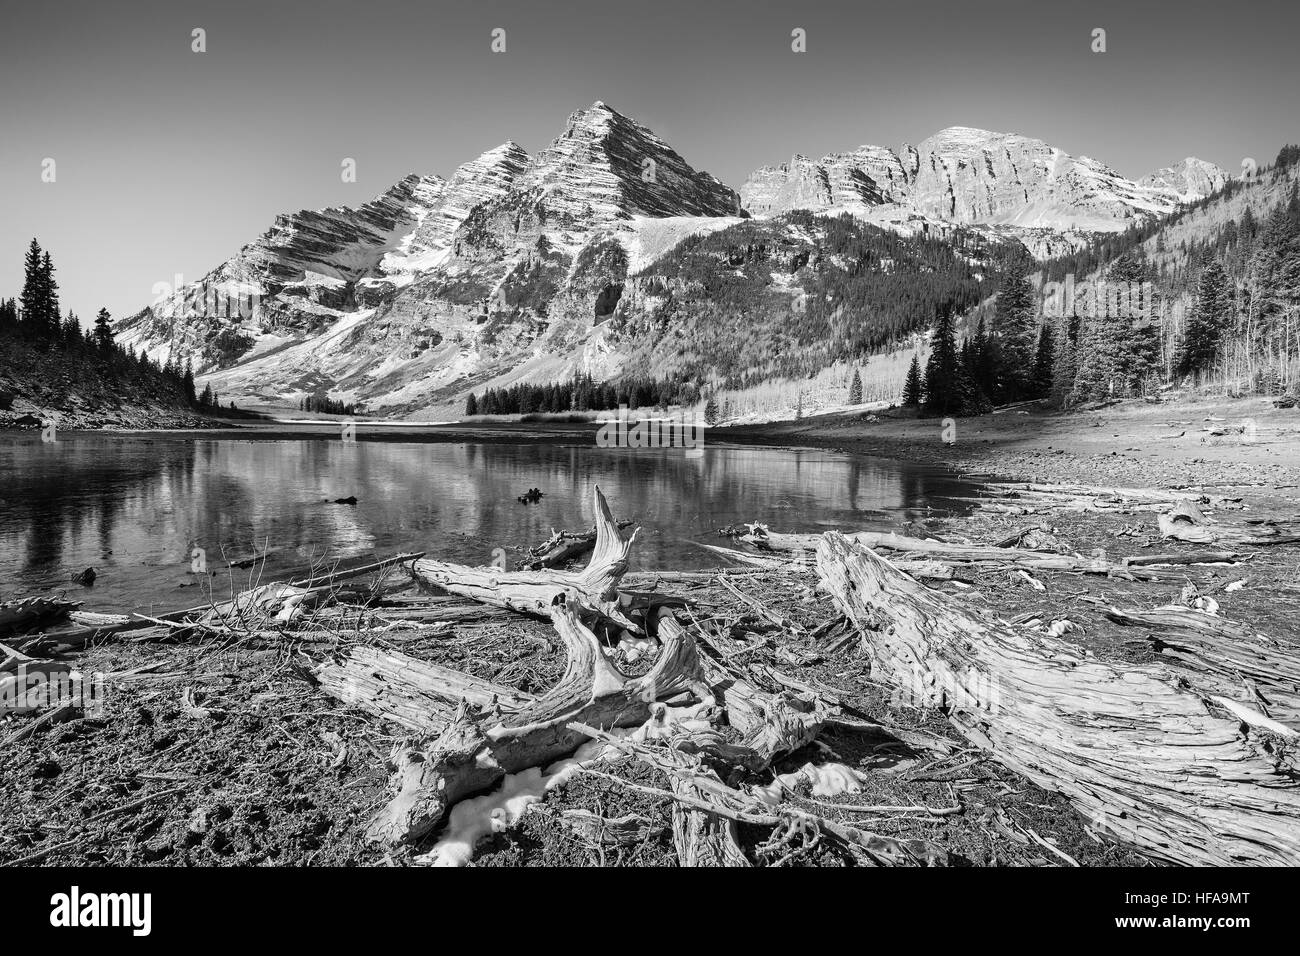 Black and white photo of Maroon Bells landscape, Aspen in Colorado, USA. Stock Photo